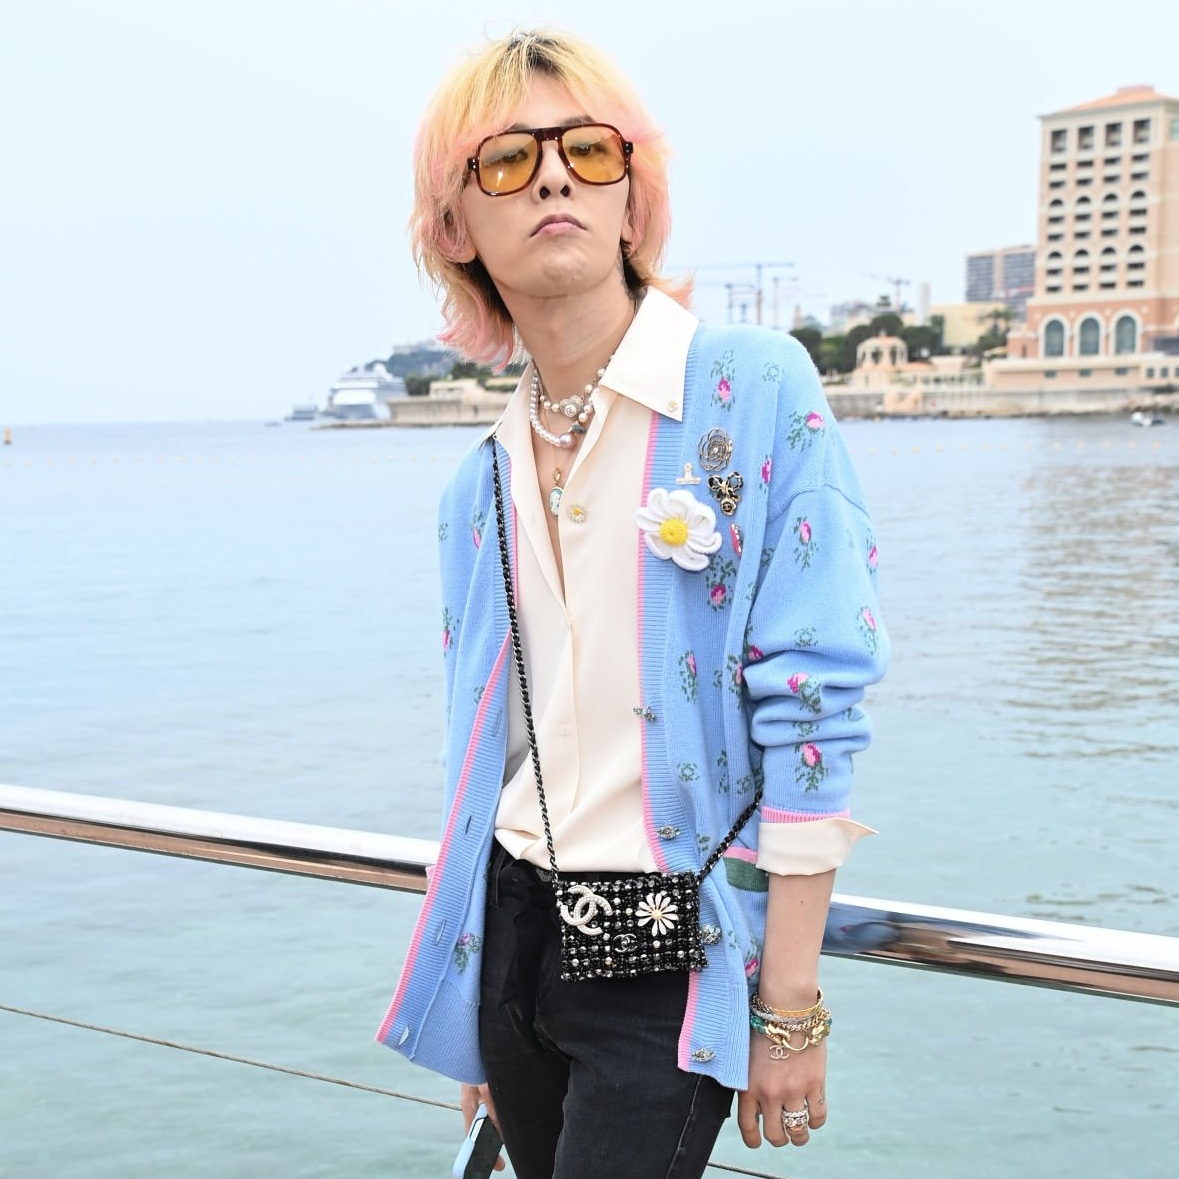 GDragon Literally Wore Chanels Jacket from the Brands Women Collection  But He Looks Just Perfect with His Own Unique Style   メンズファッション 海外セレブ  ファッション セレブ ファッション